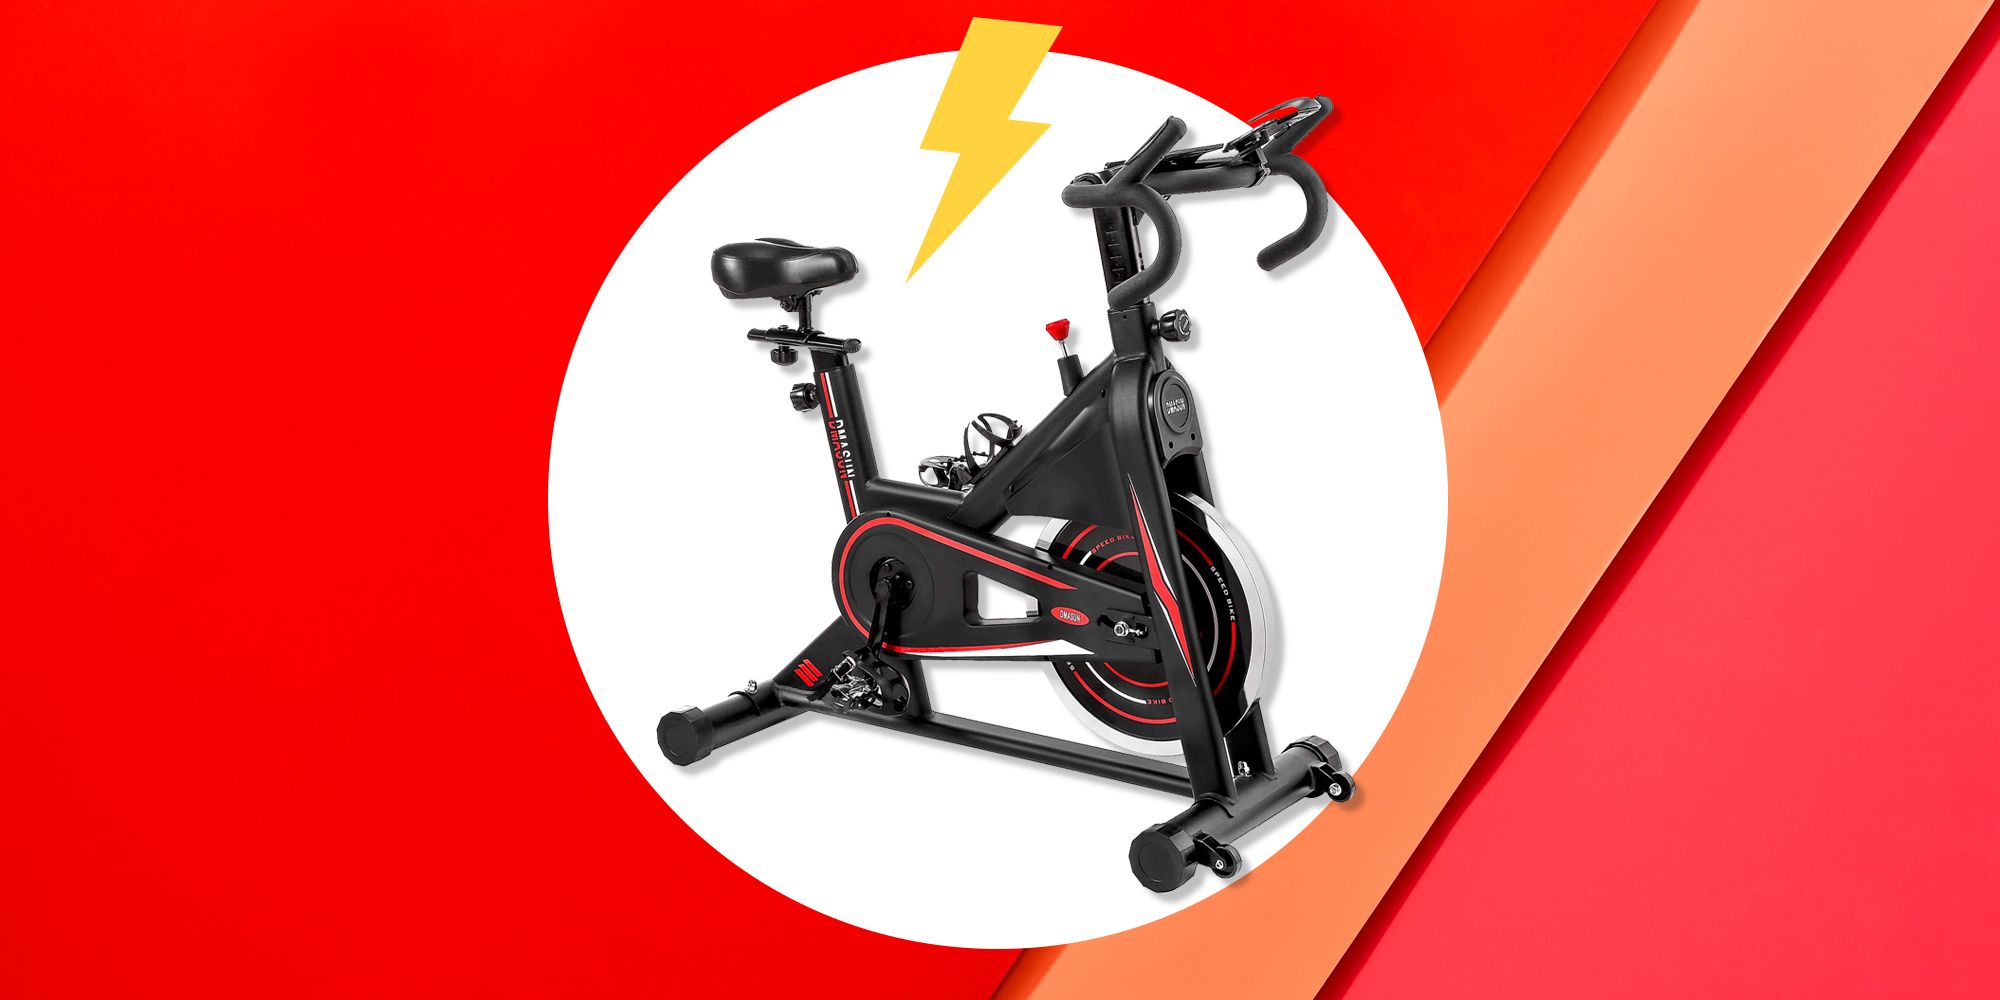 Indoor Exercise Stationary Bike Cycling Home Gym Cardio Workout Indoor Fitness 